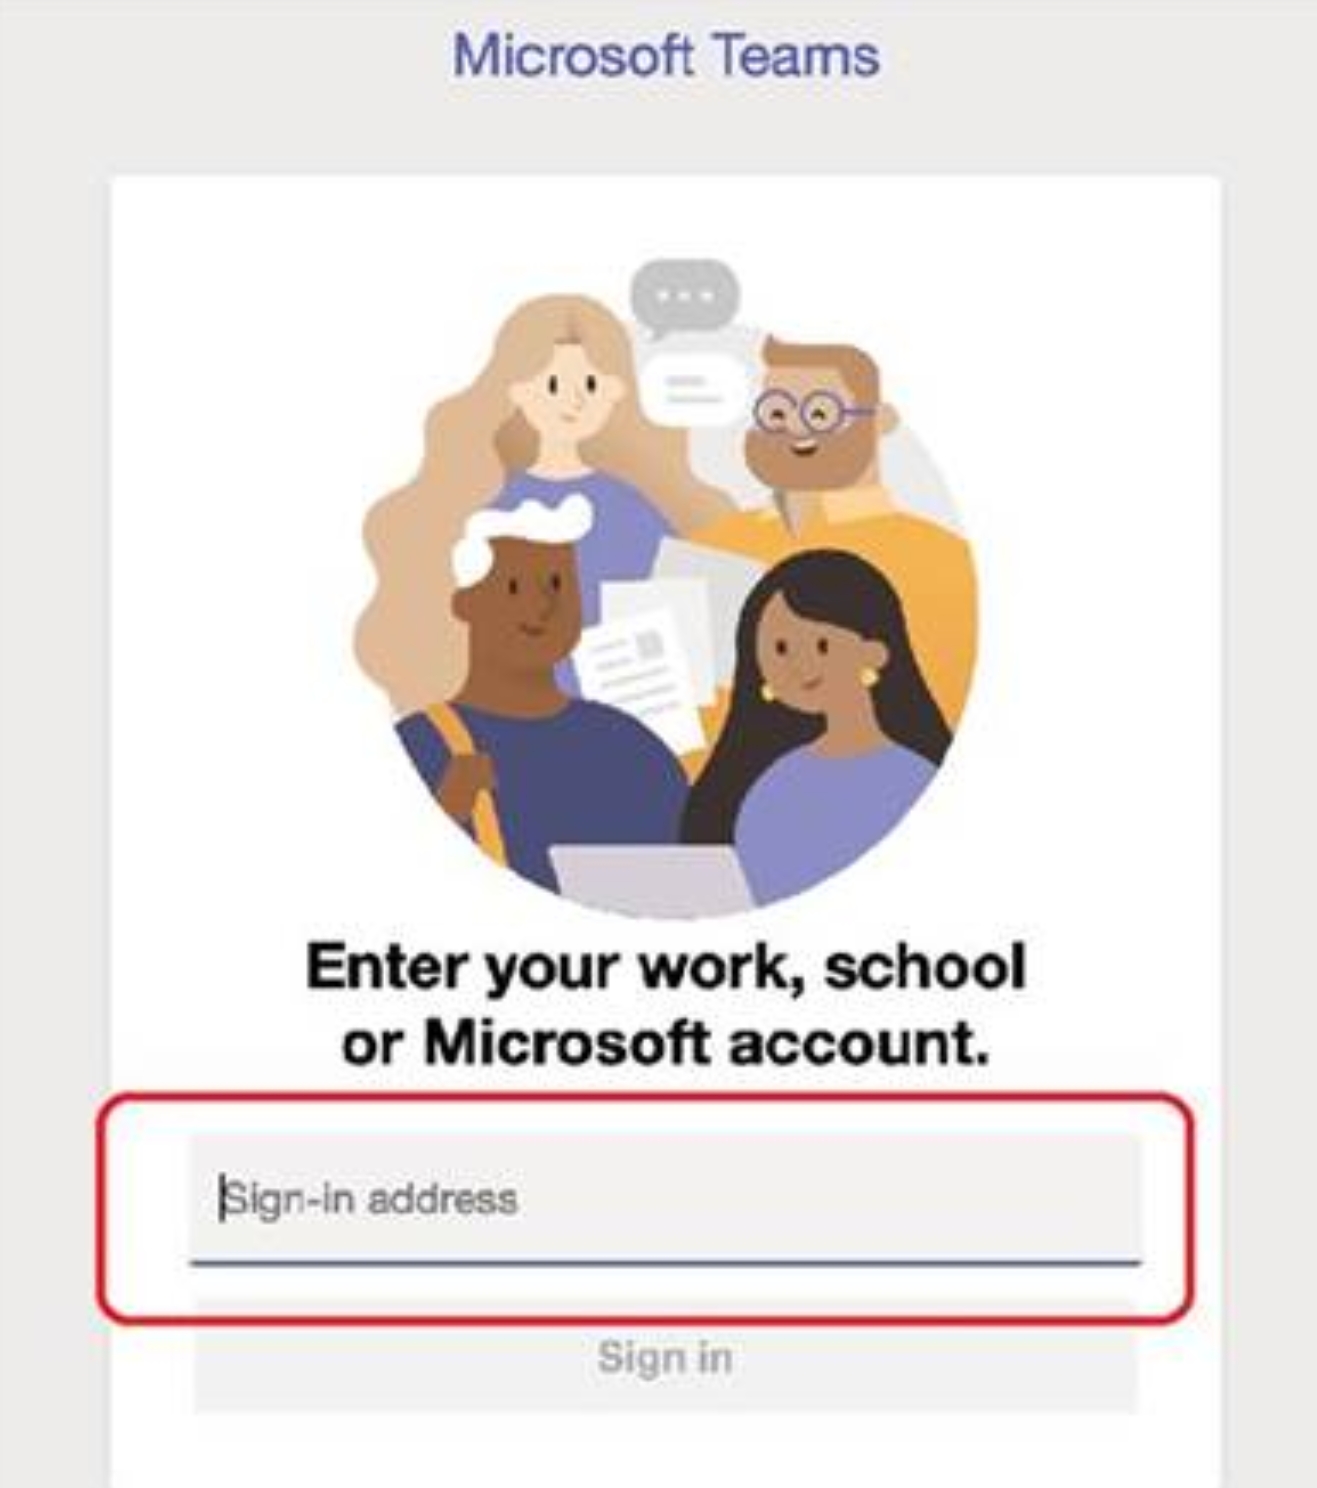 How to access Microsoft Teams with your John Cabot account